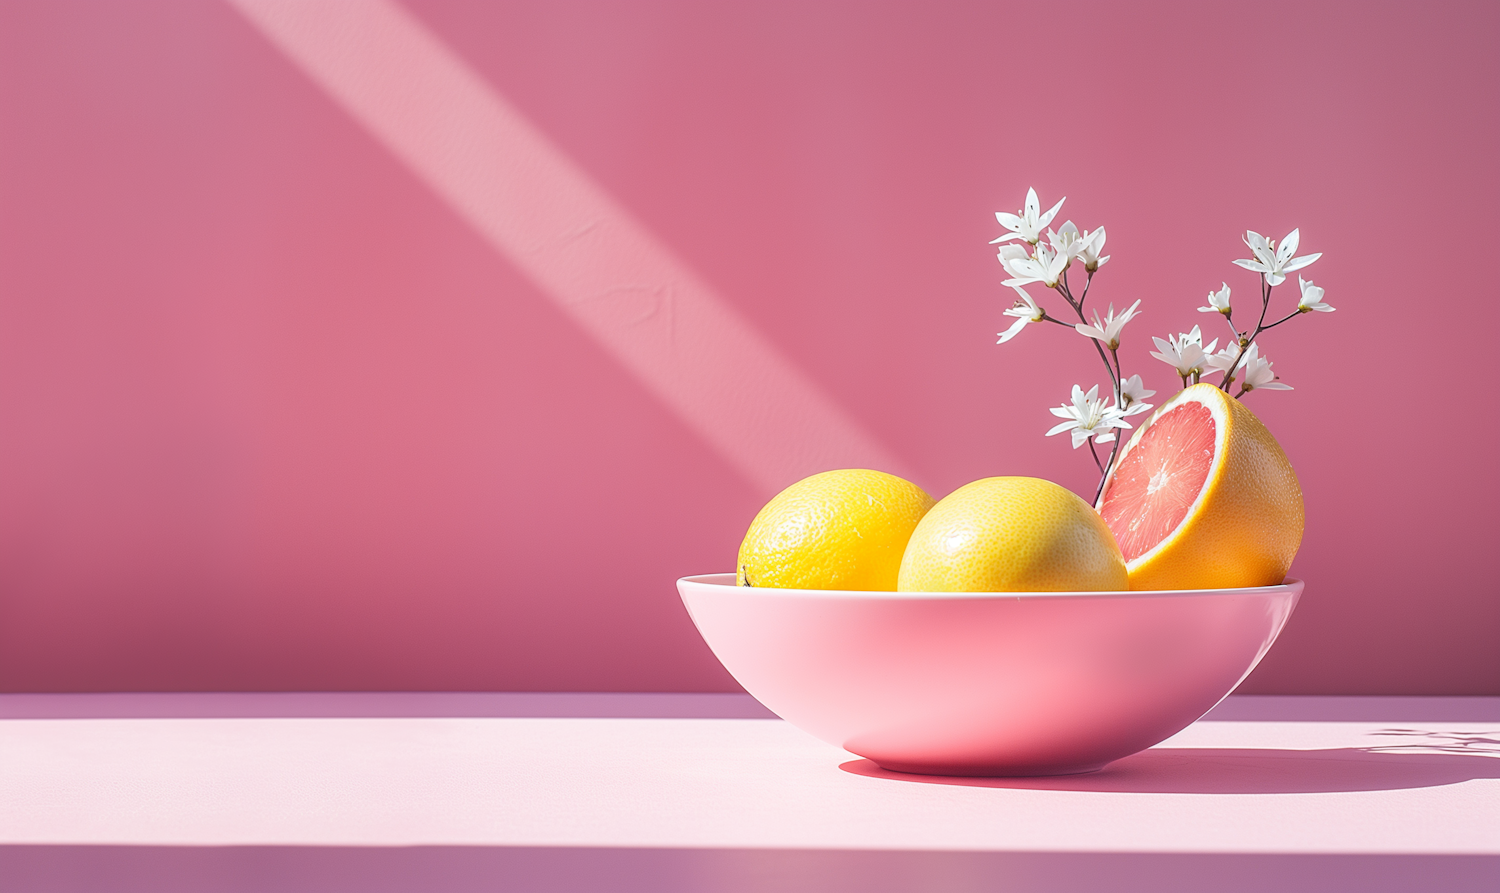 Citrus Fruits and Flowers Still Life